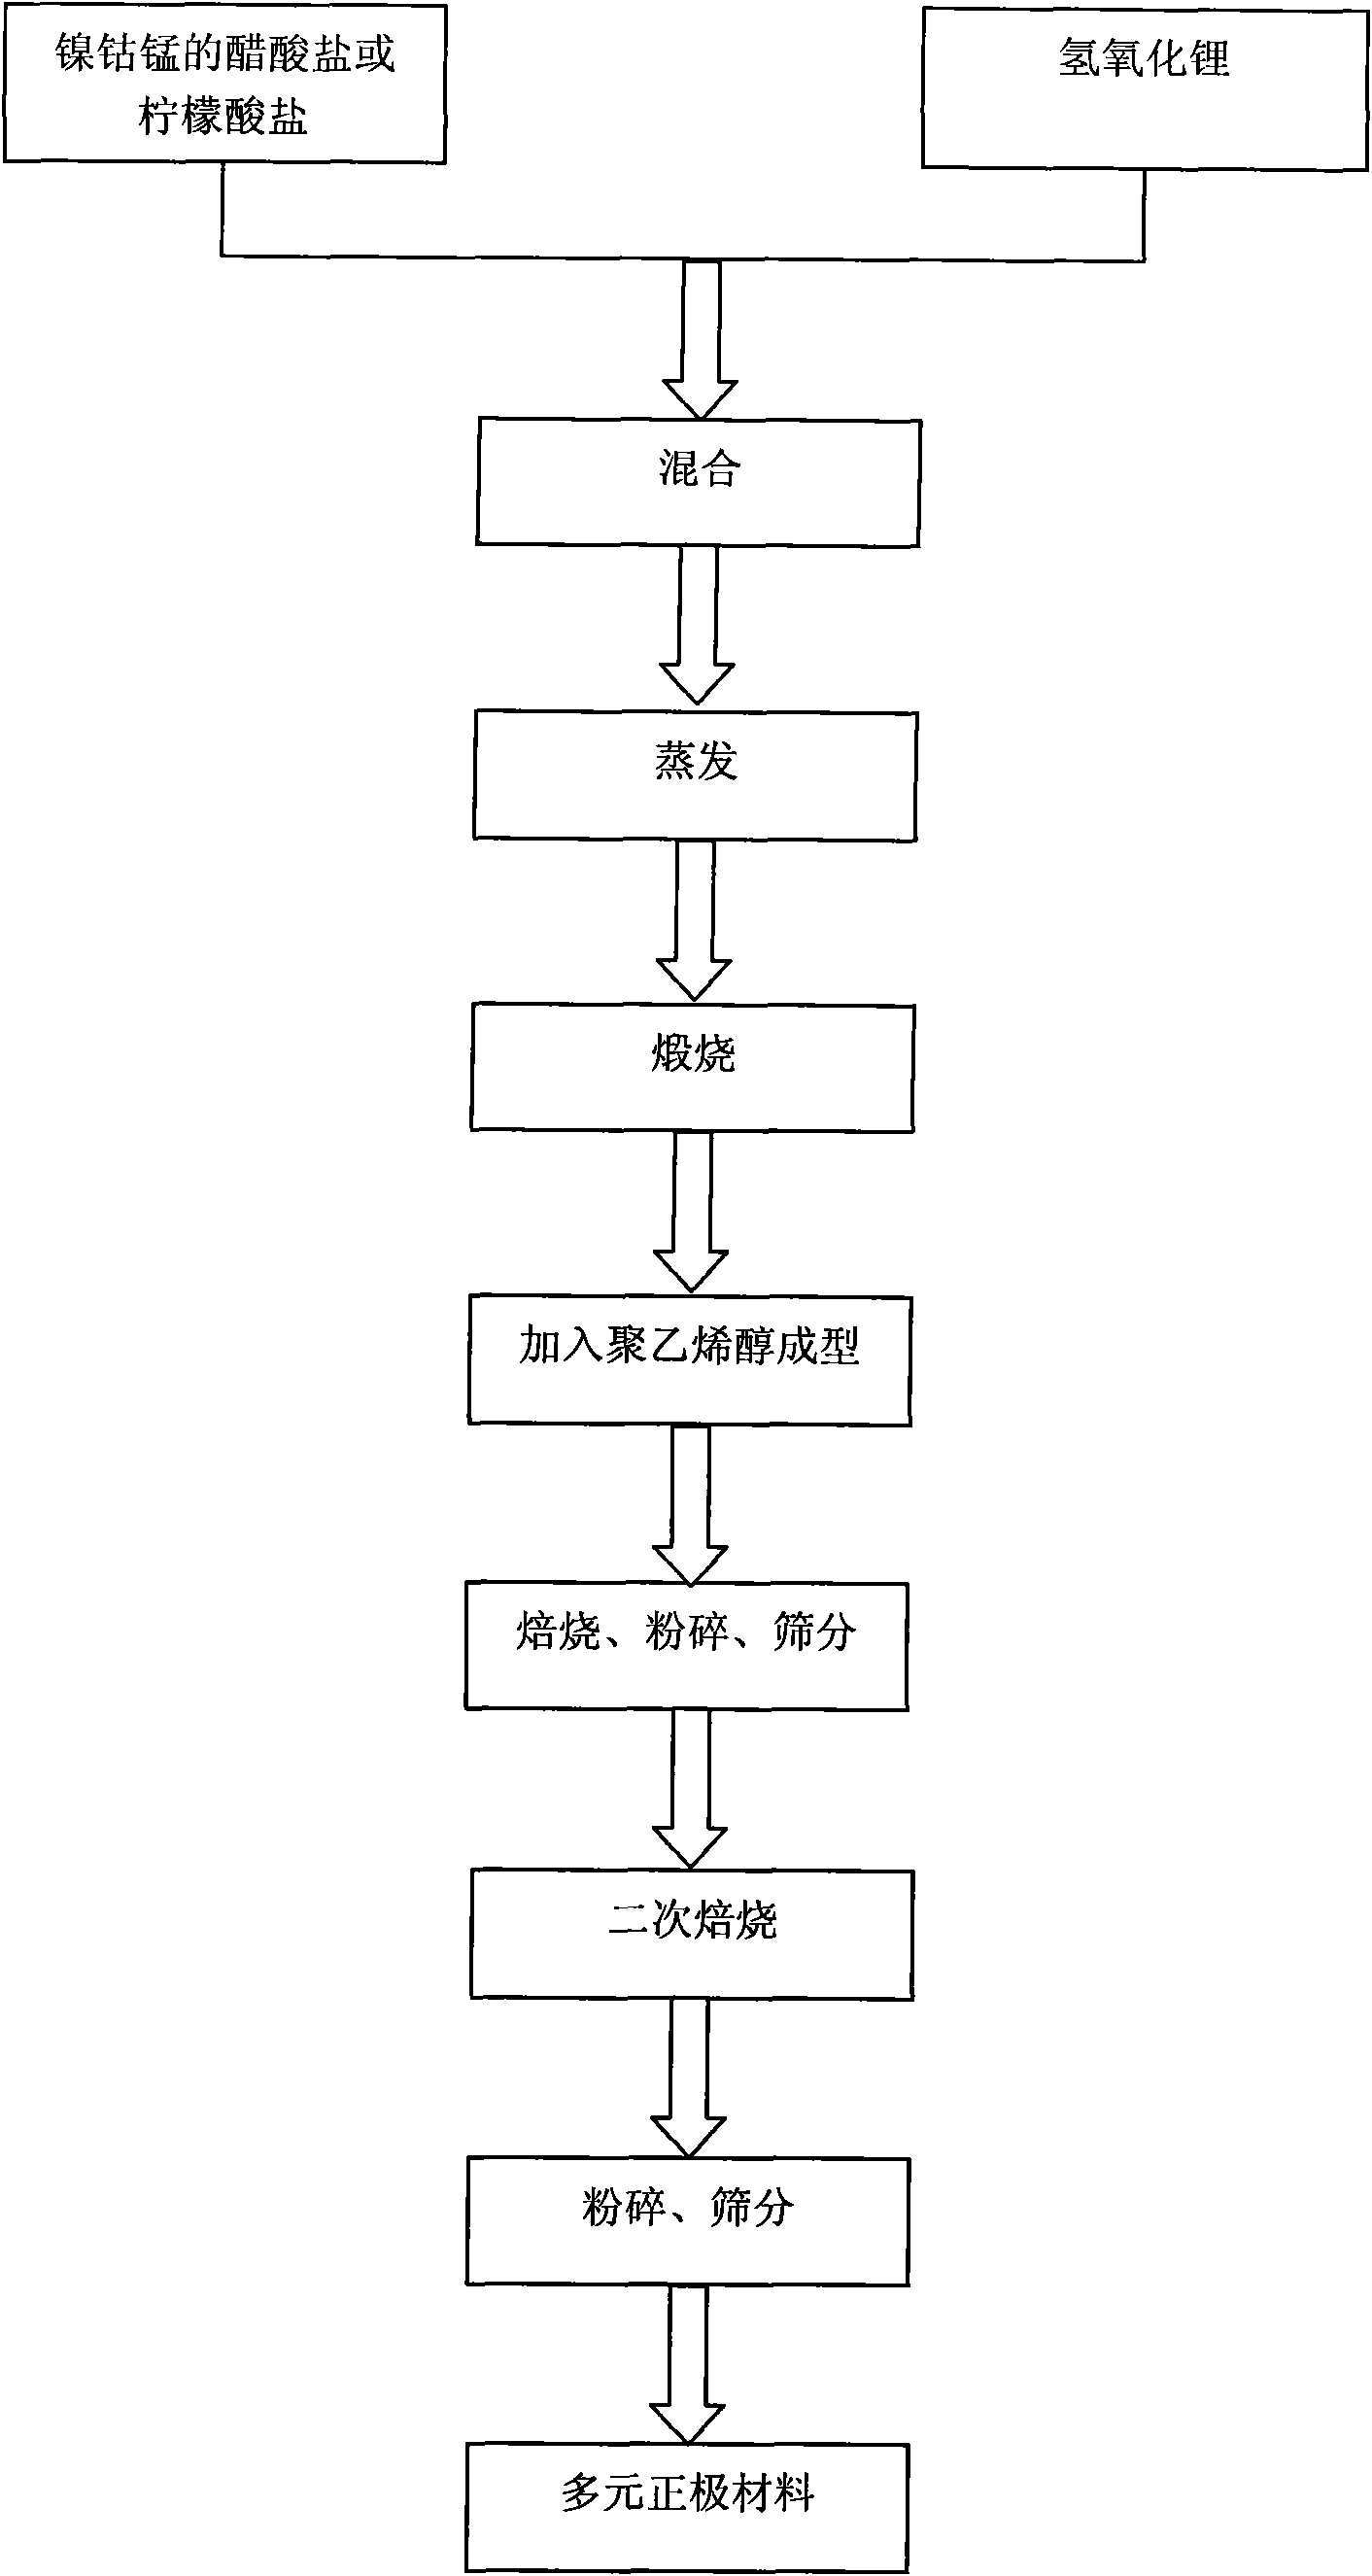 Nickel-cobalt-manganese multi-doped lithium ion battery cathode material and preparation method thereof